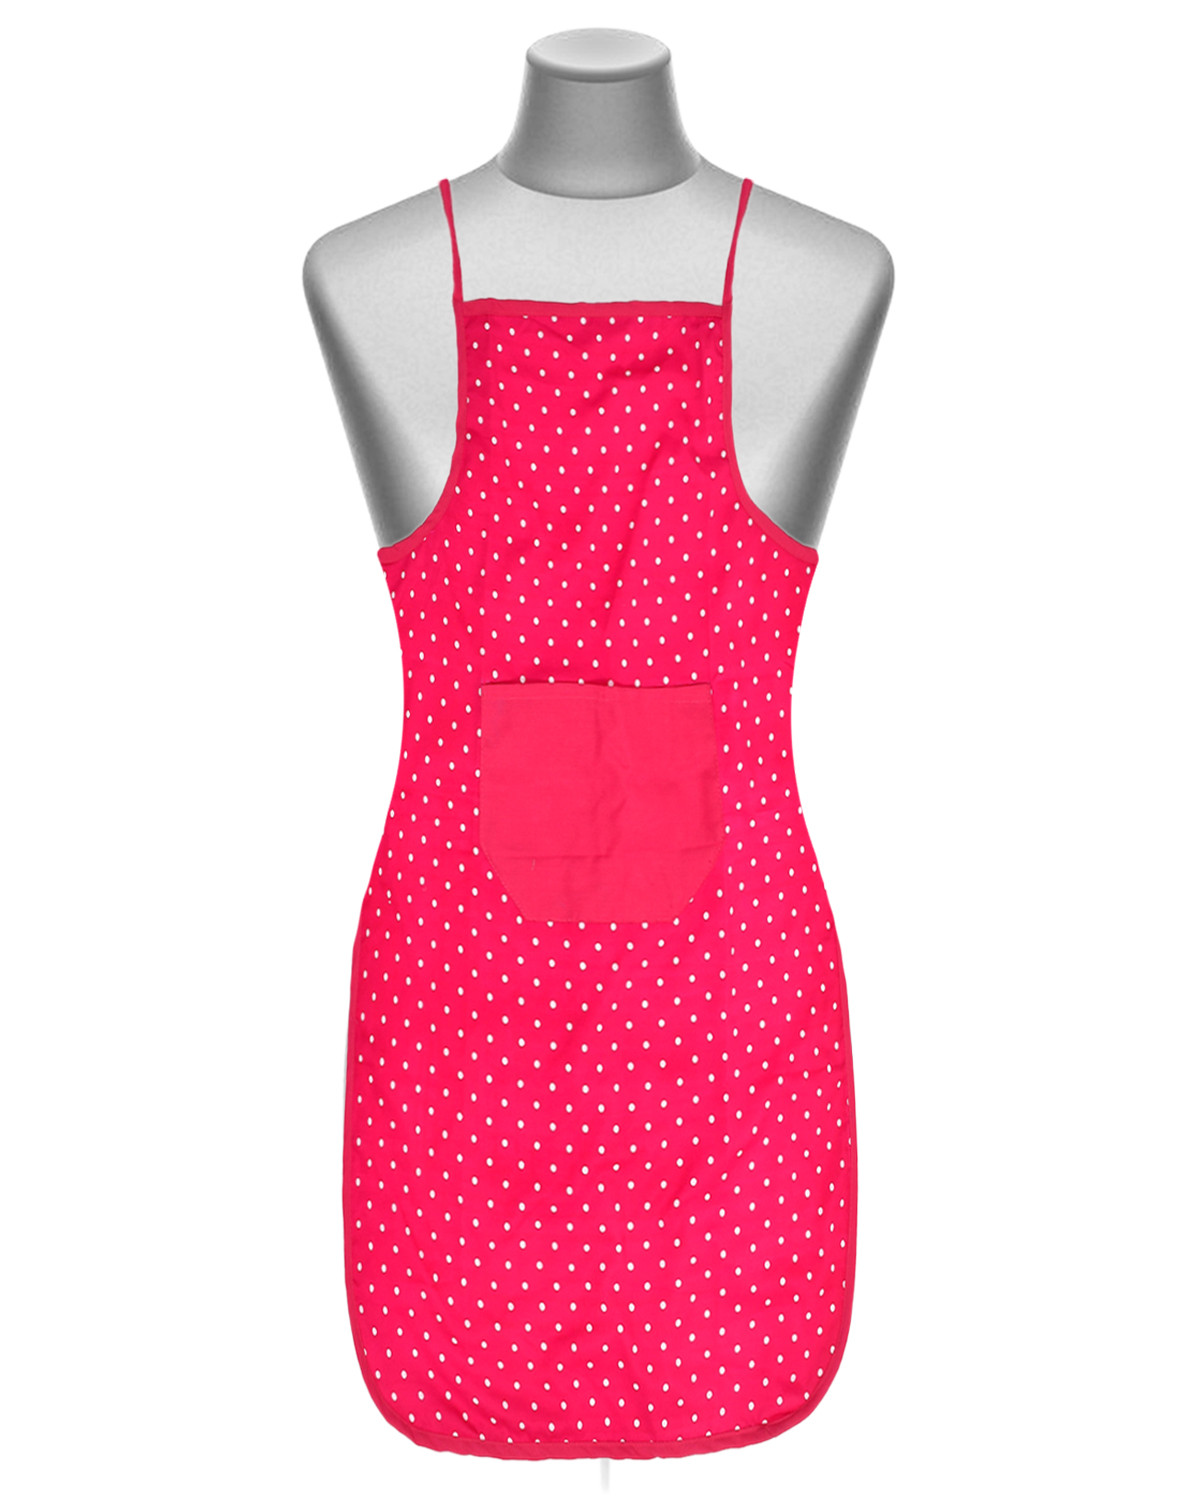 Kuber Industries Dot Printed Apron with 1 Front Pocket (Pink)